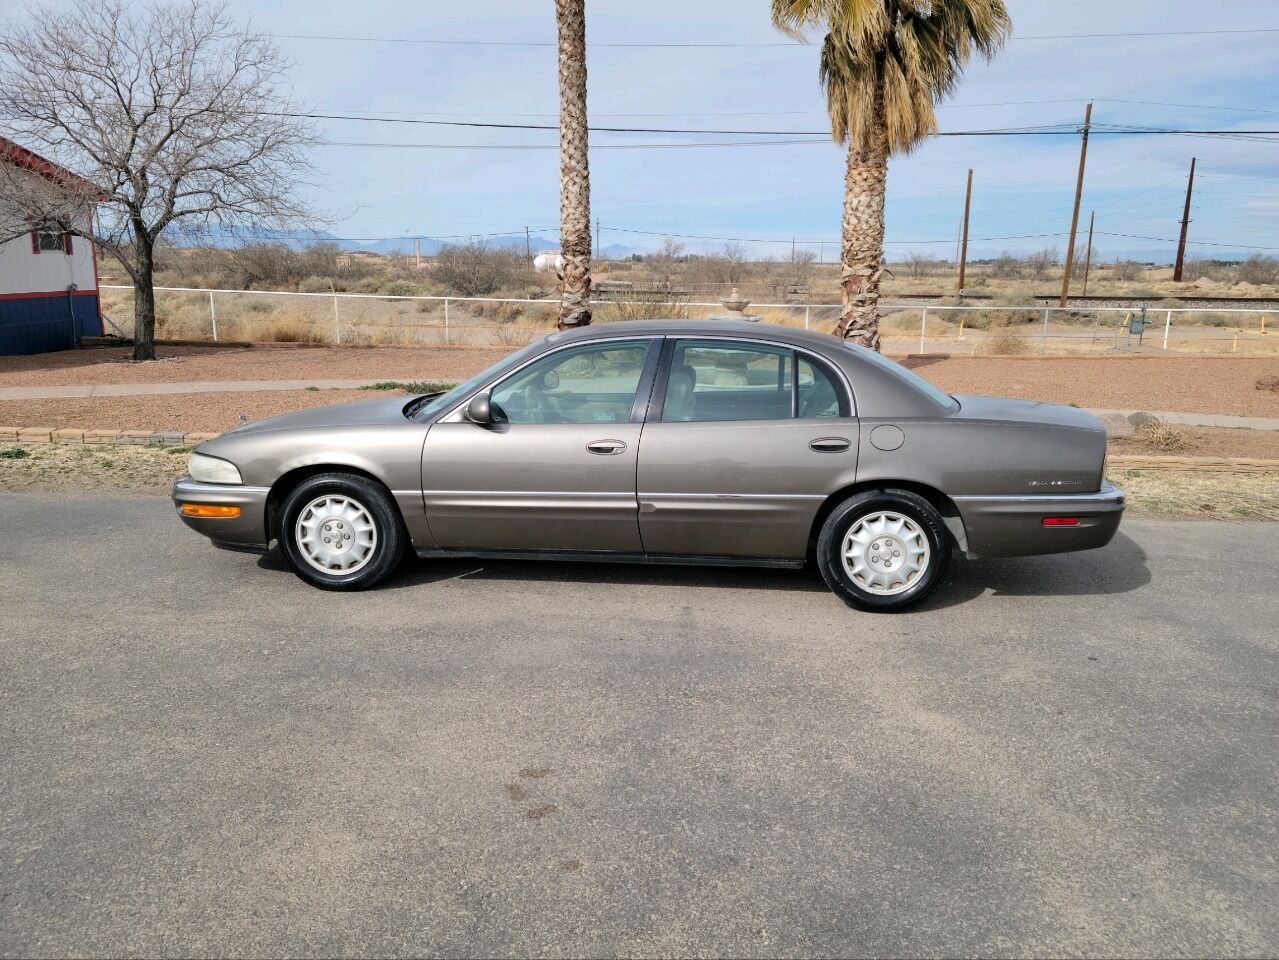 2000 Buick Park Avenue For Sale In Los Angeles, CA - Carsforsale.com®